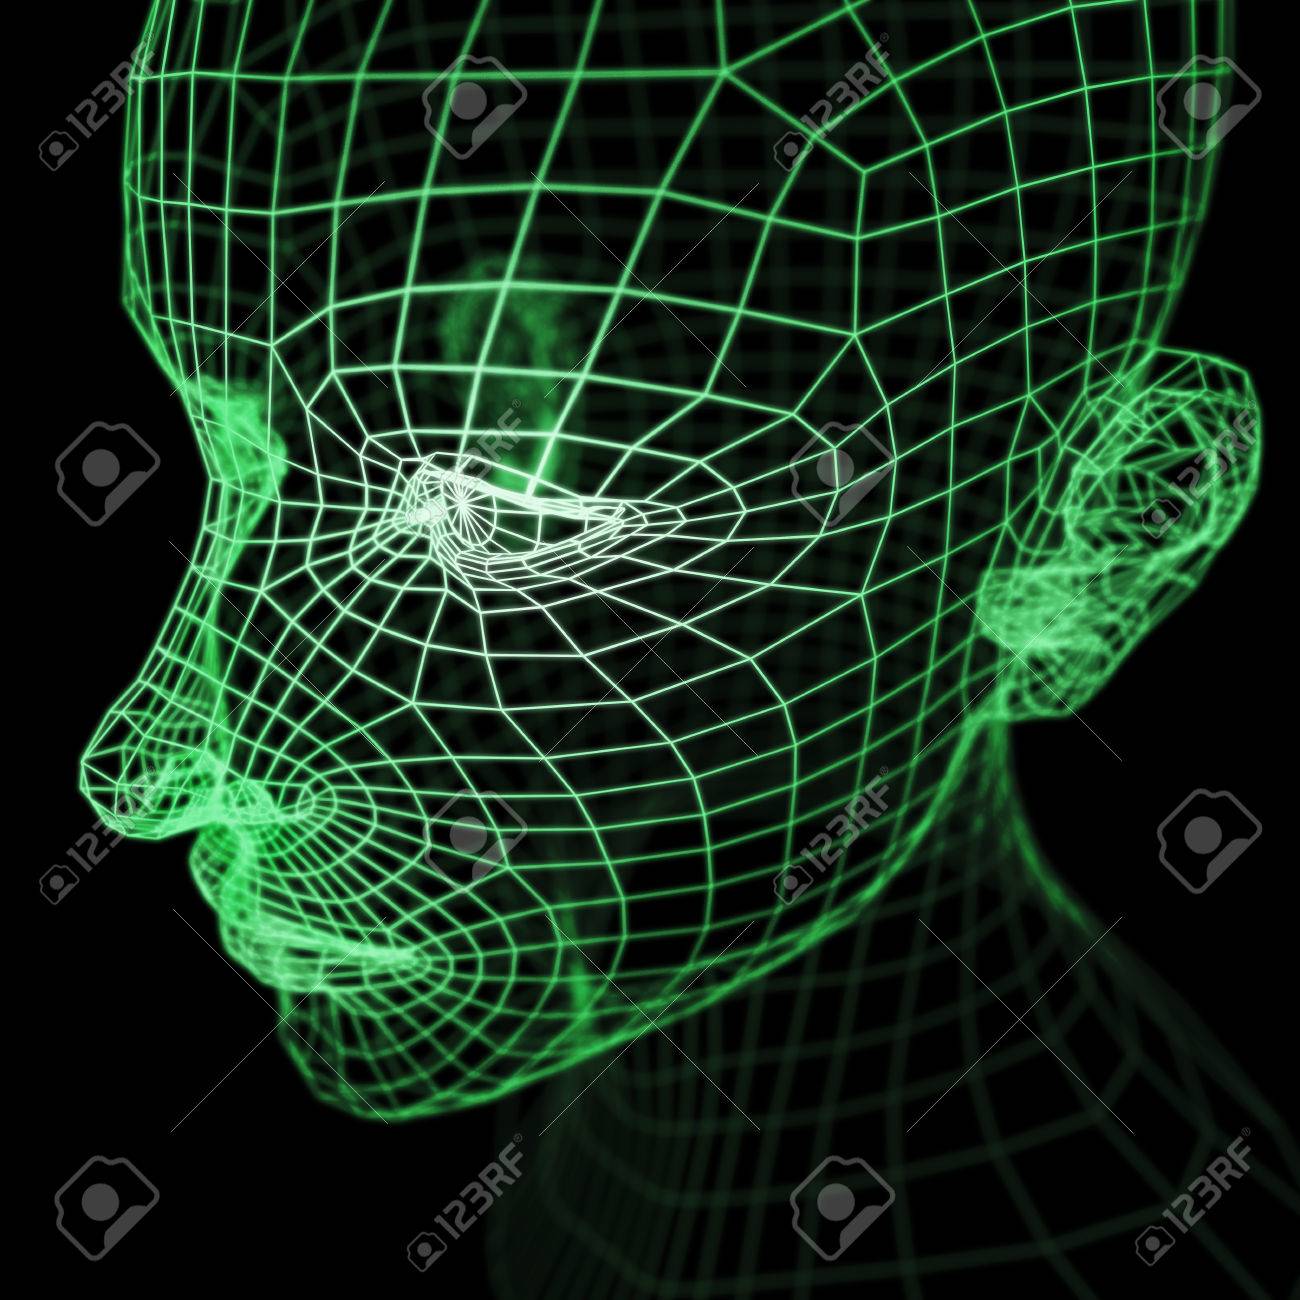 39148779-A-computer-generated-imagery-of-a-polygonal-human-head-model-rendered-with-wireframe-style-Greenish--Stock-Photo.jpg